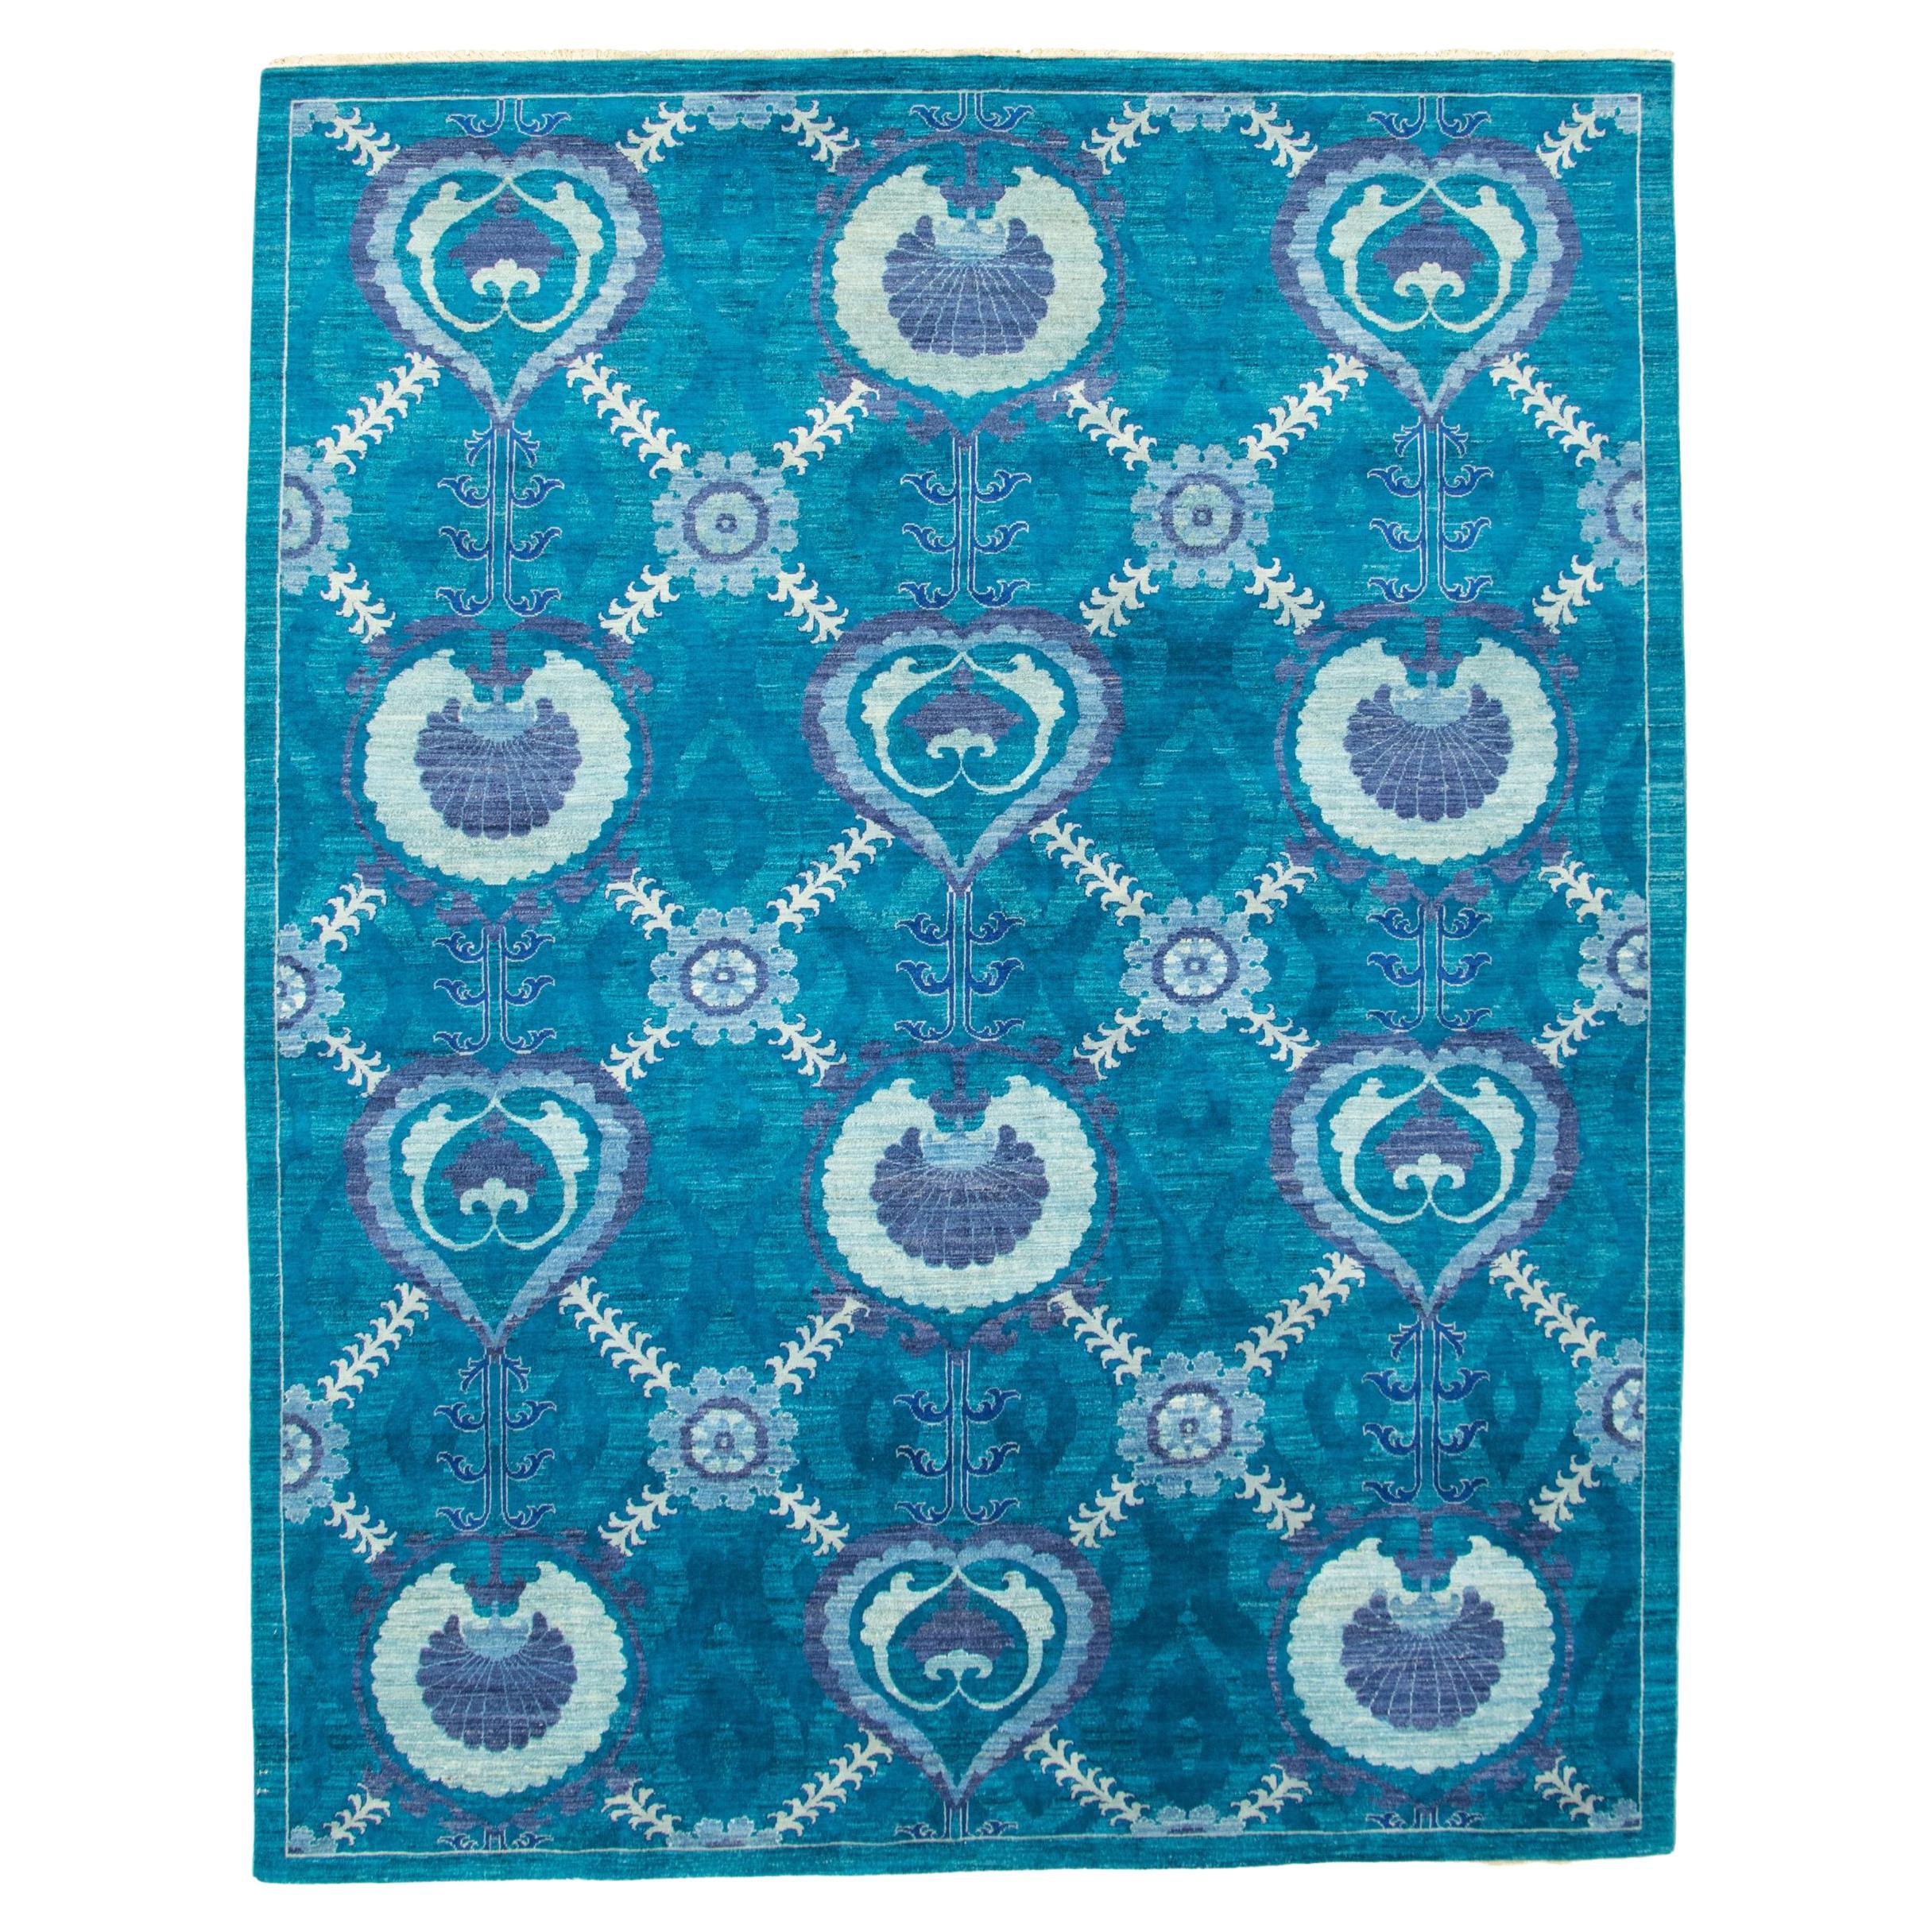 Preppy Blue Arts and Crafts and Transitional Wool Oushak Hand-Knotted Carpet